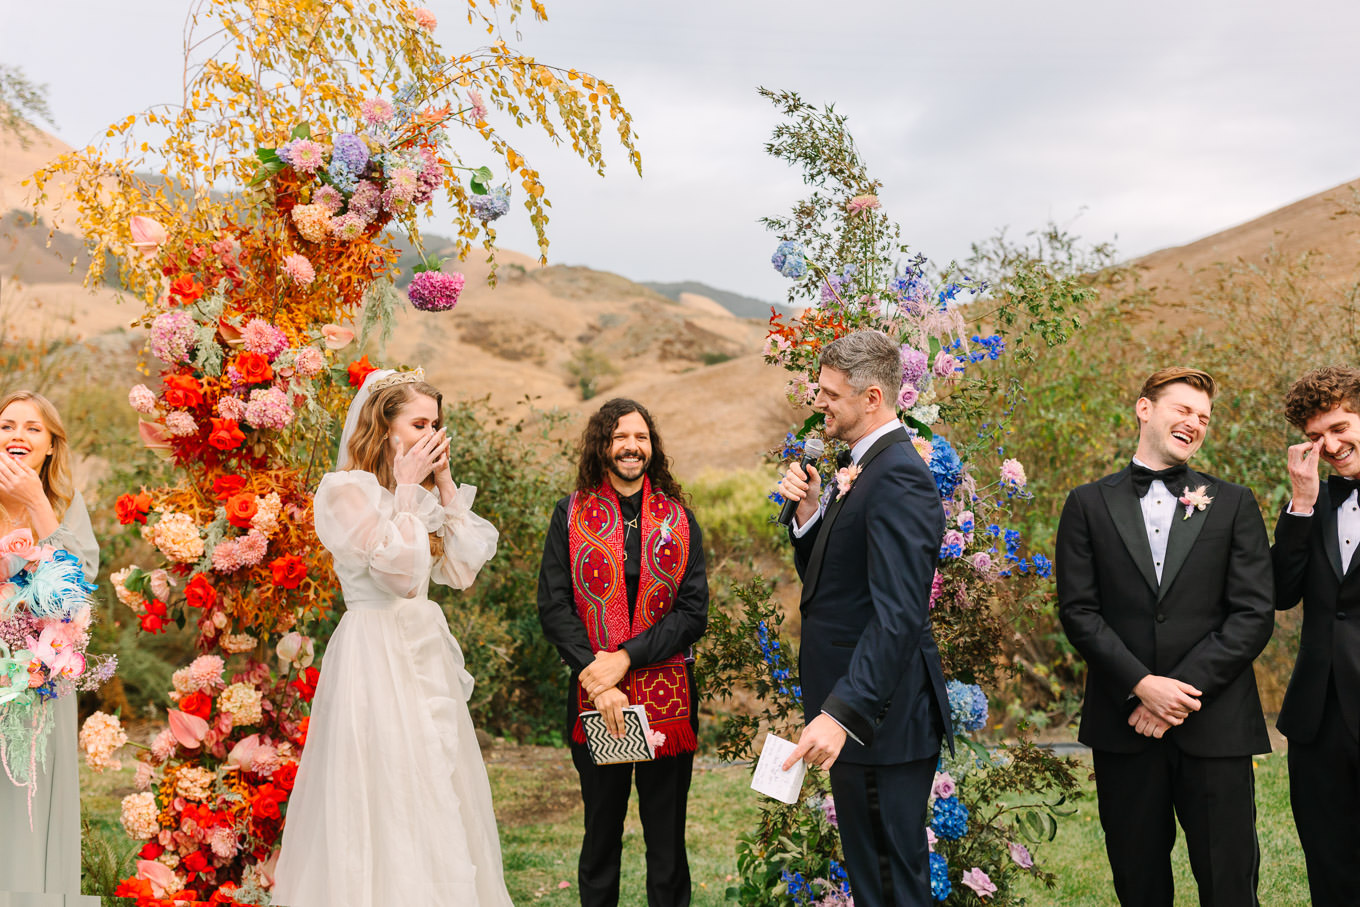 Wedding vow exchange | Colorful and quirky wedding at Higuera Ranch in San Luis Obispo | #sanluisobispowedding #californiawedding #higueraranch #madonnainn   Source: Mary Costa Photography | Los Angeles